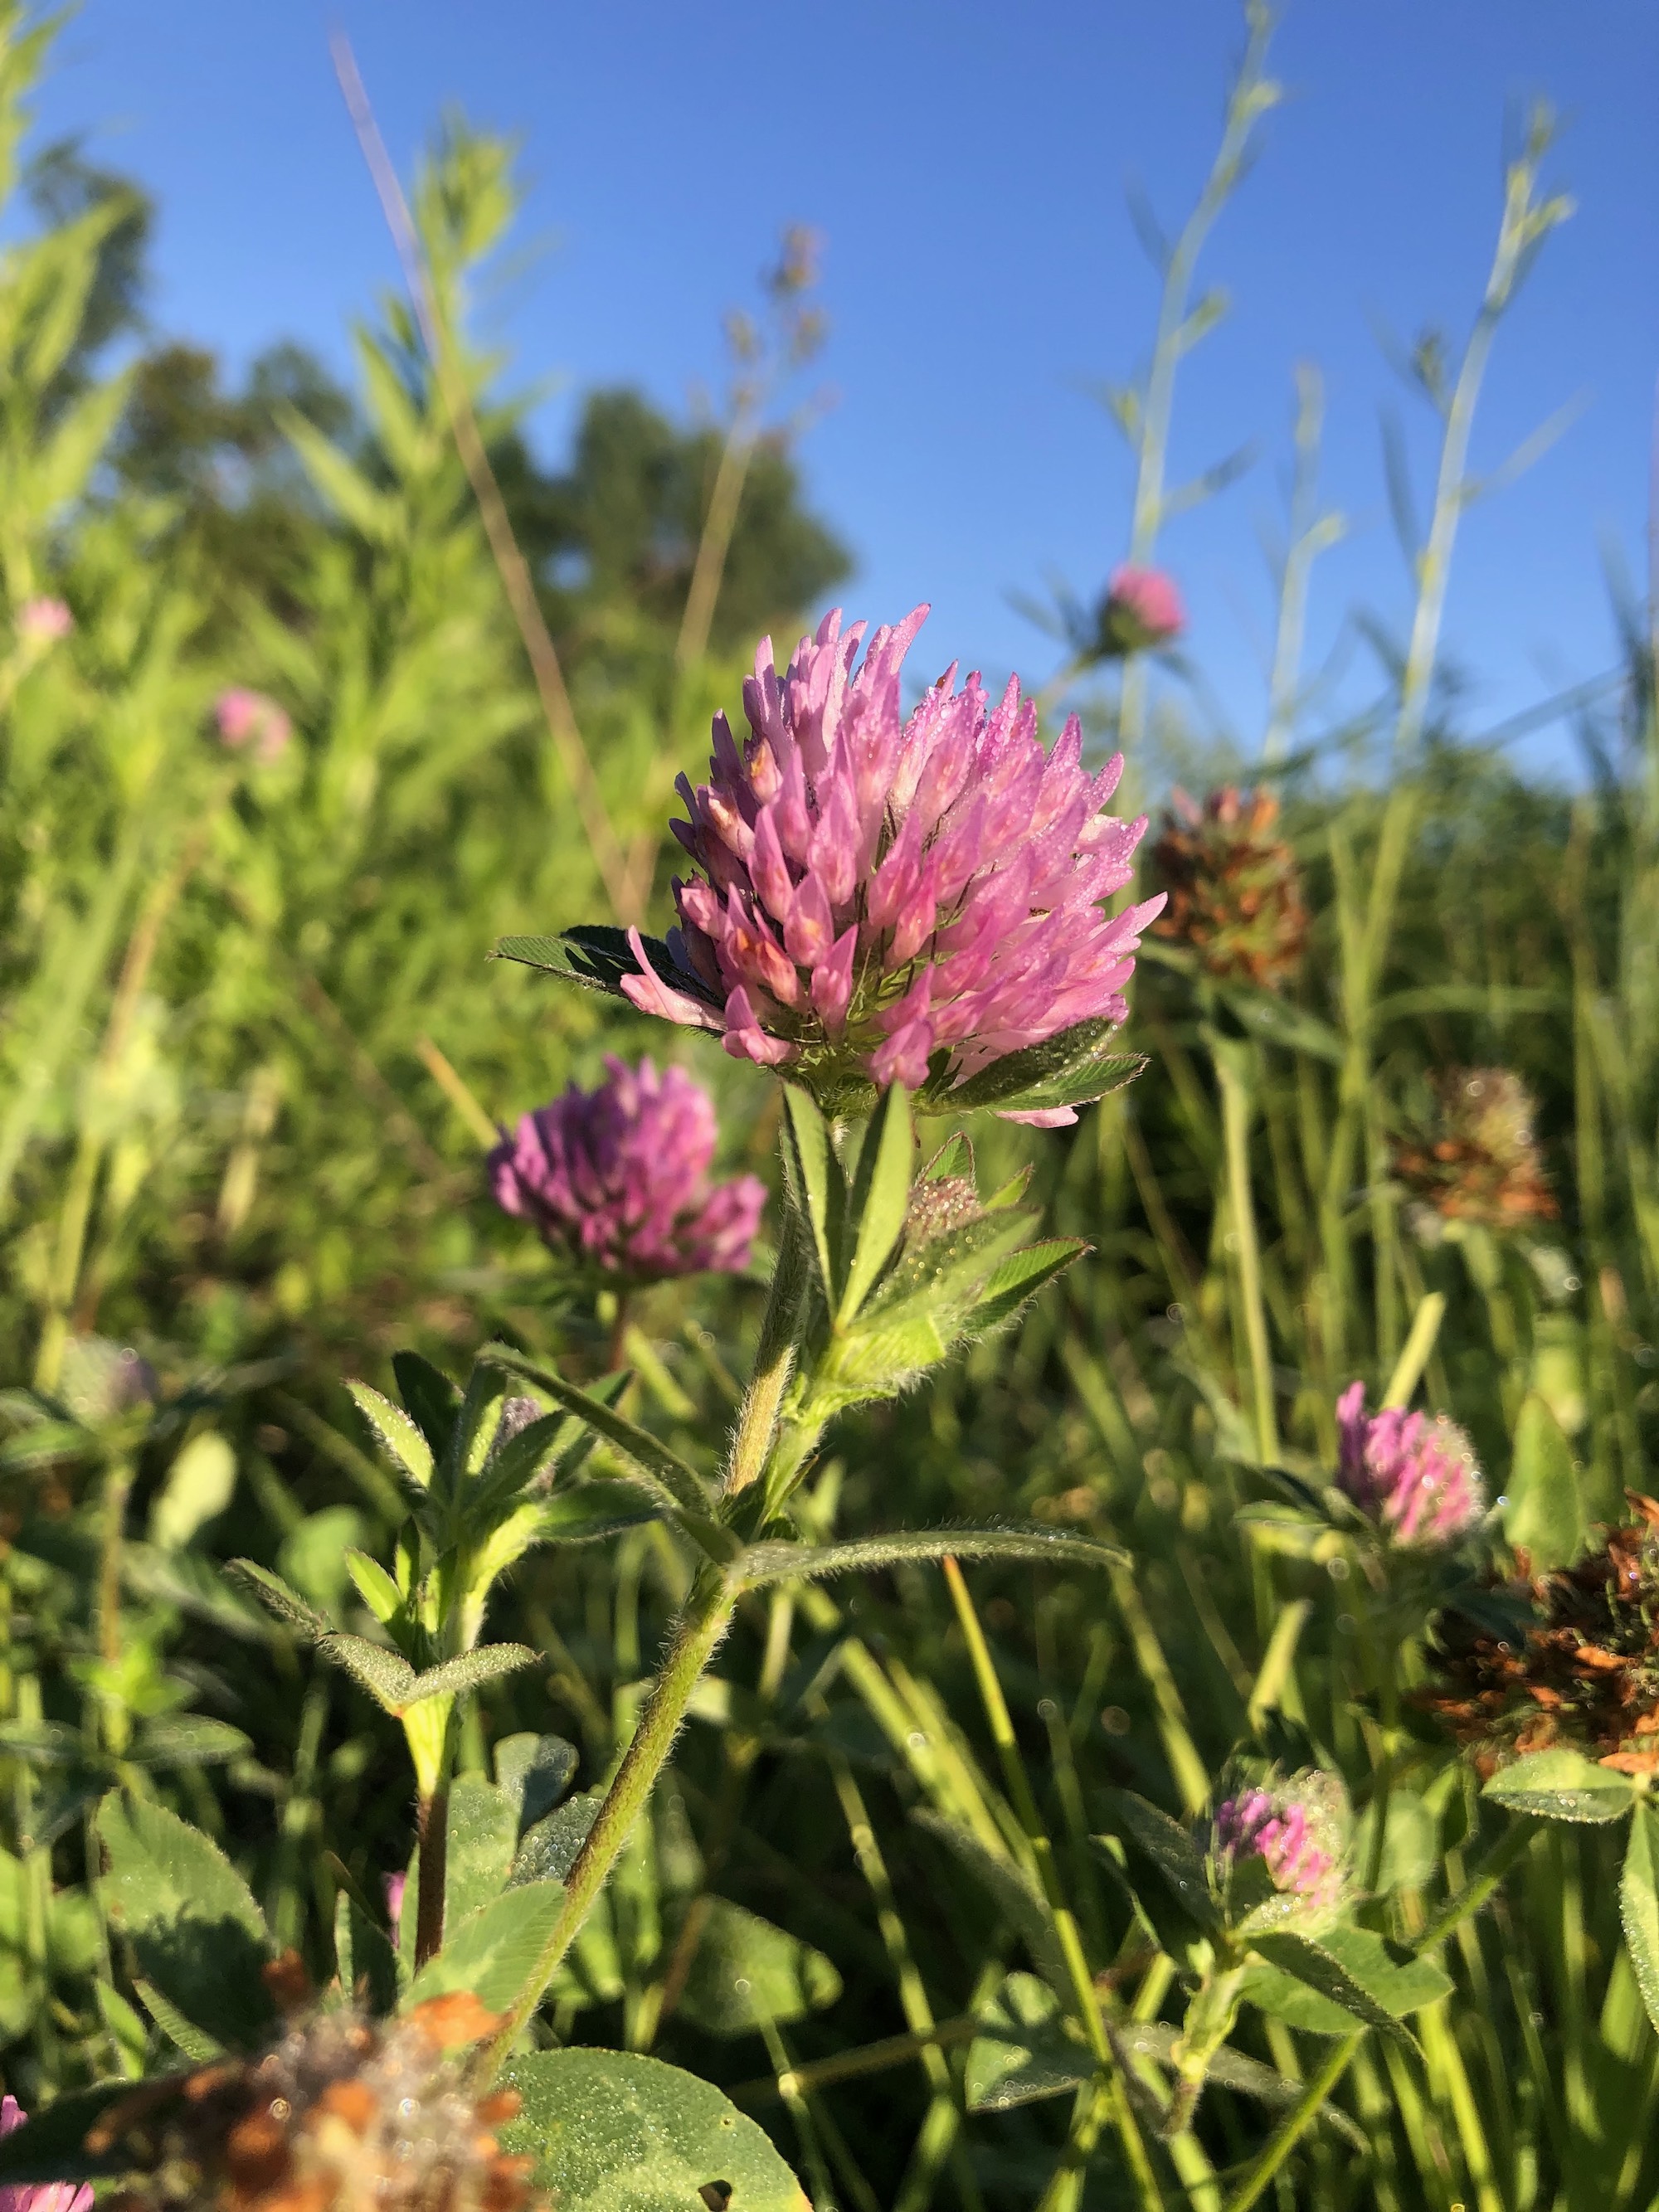 Red Clover in Marion Dunn Prairie in Madison, Wisconsin on June 22, 2021.